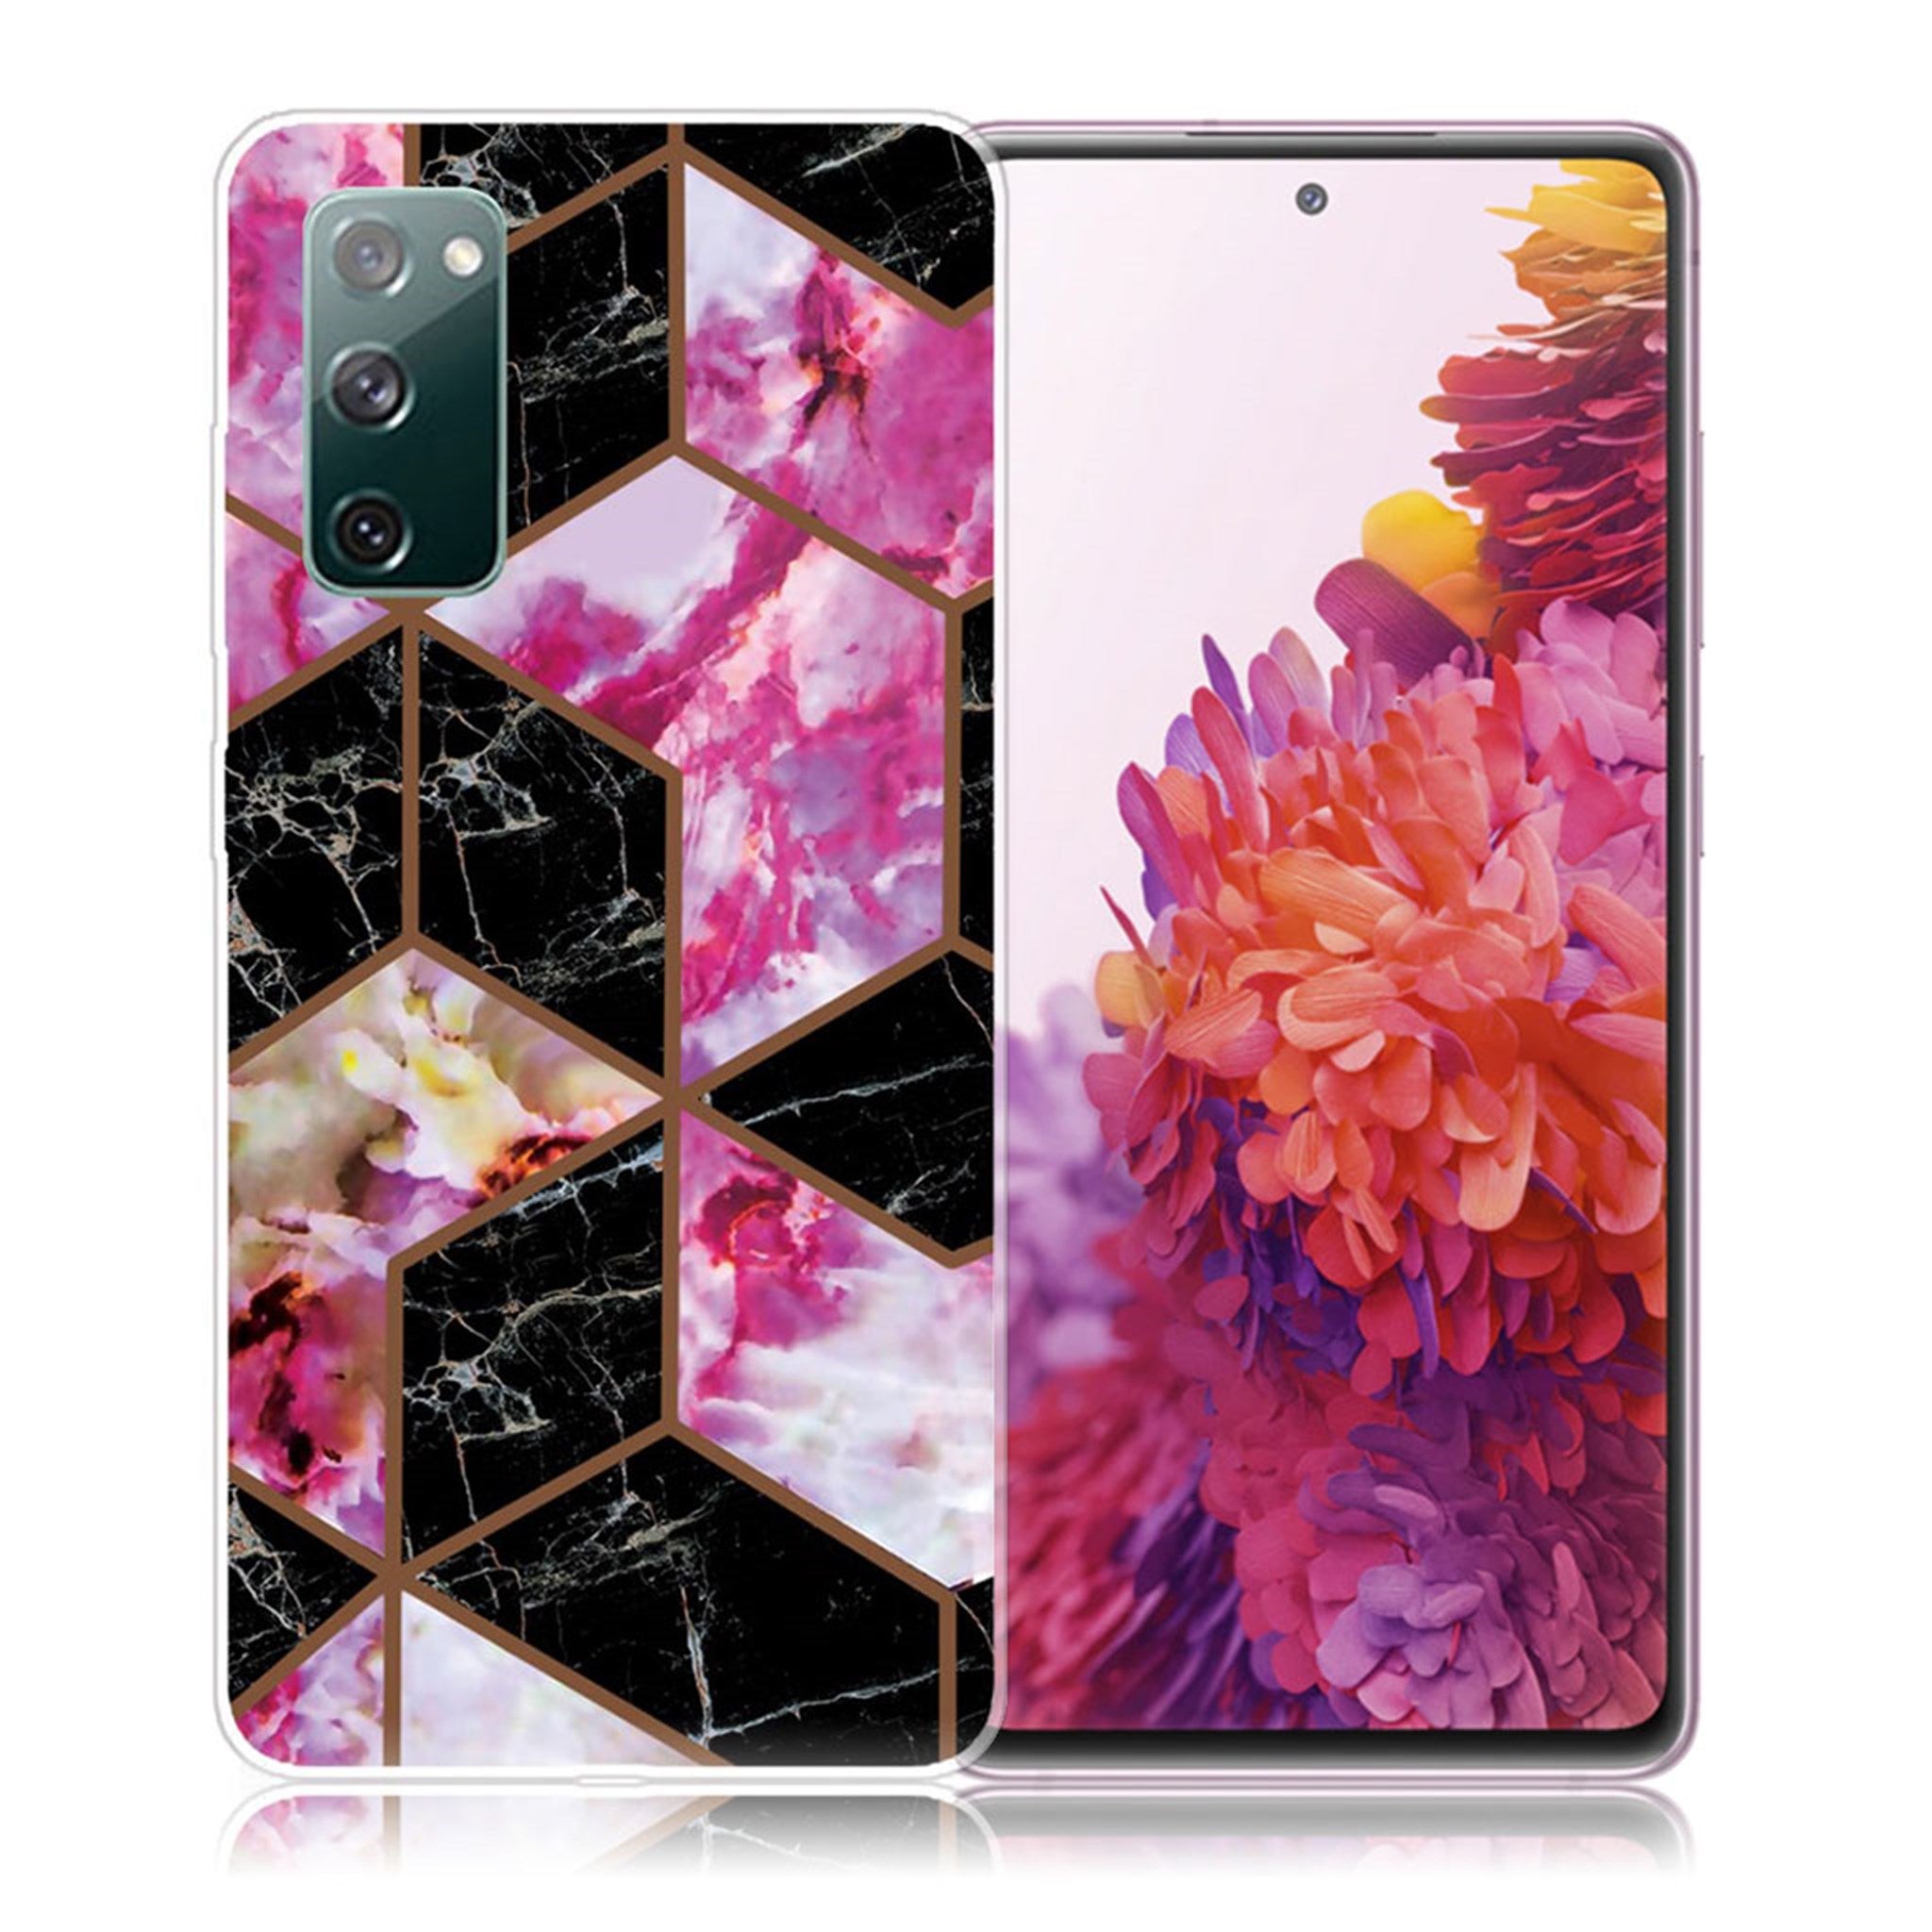 Marble Samsung Galaxy S20 FE case - Black and Rose Marble